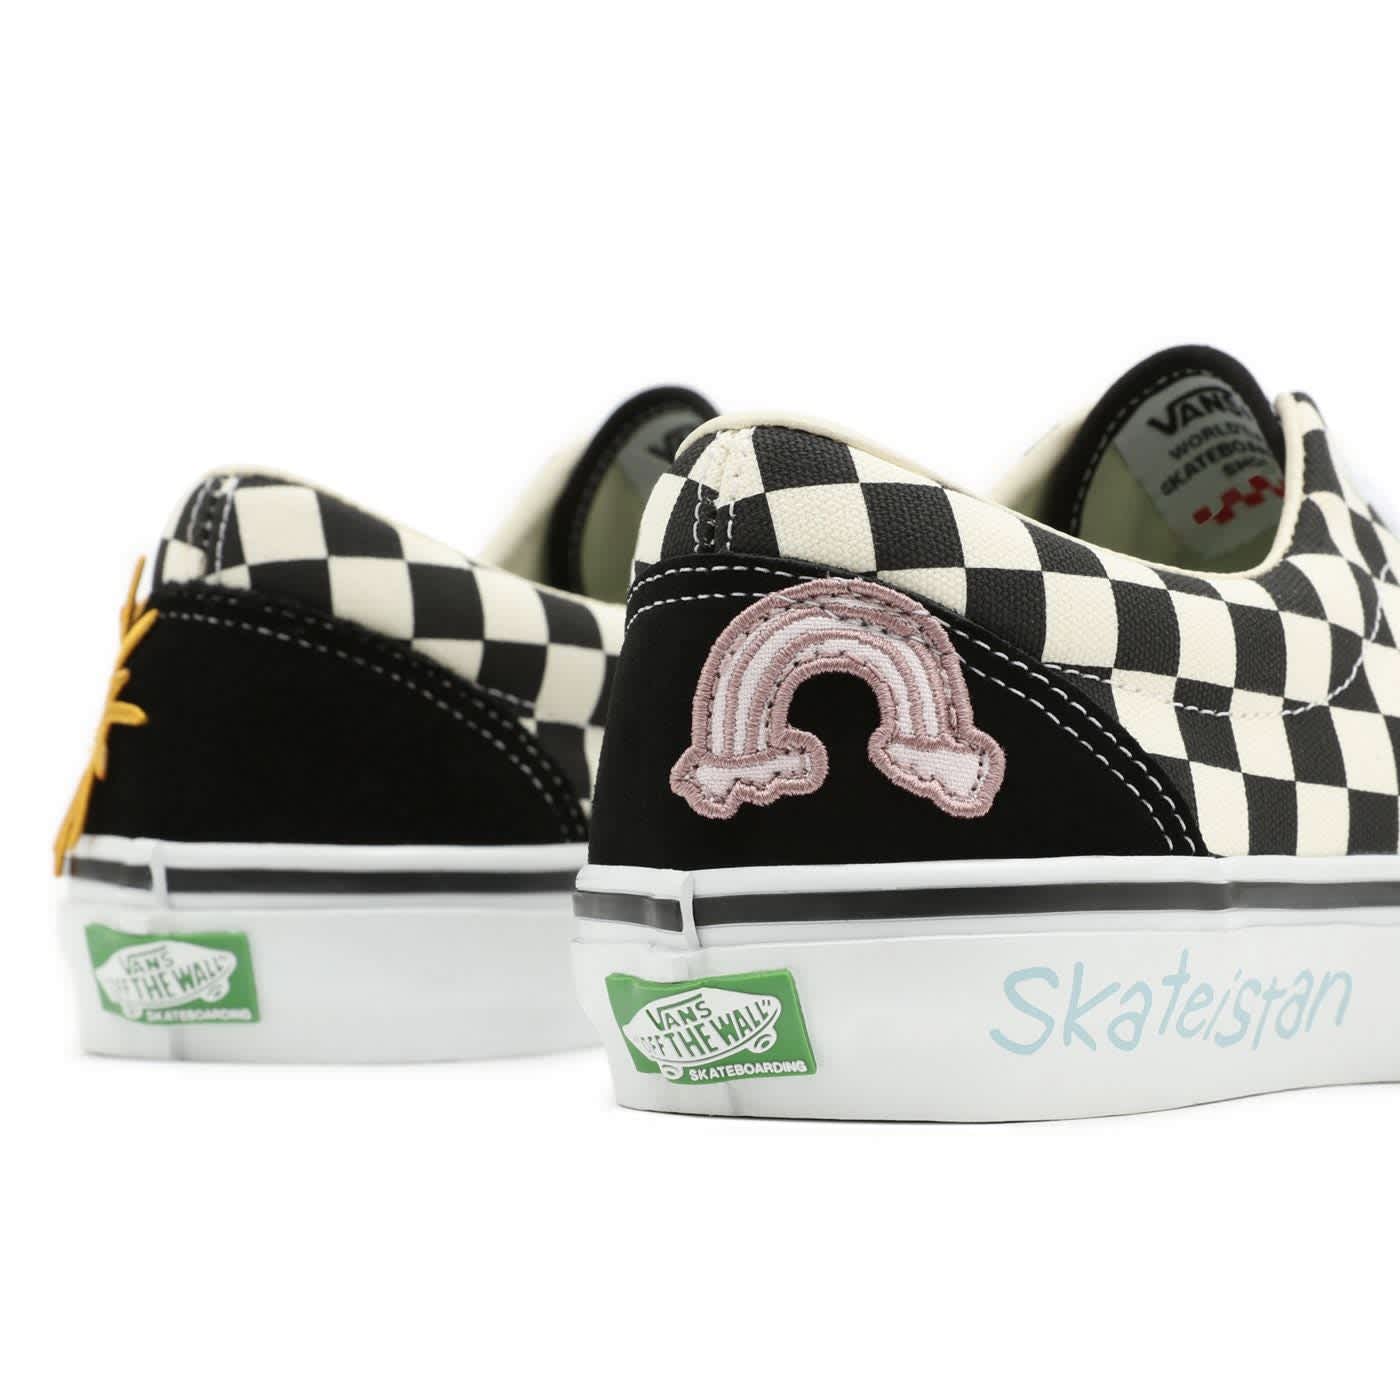 Vans Partners With Skateistan To Build & Support Skateboard